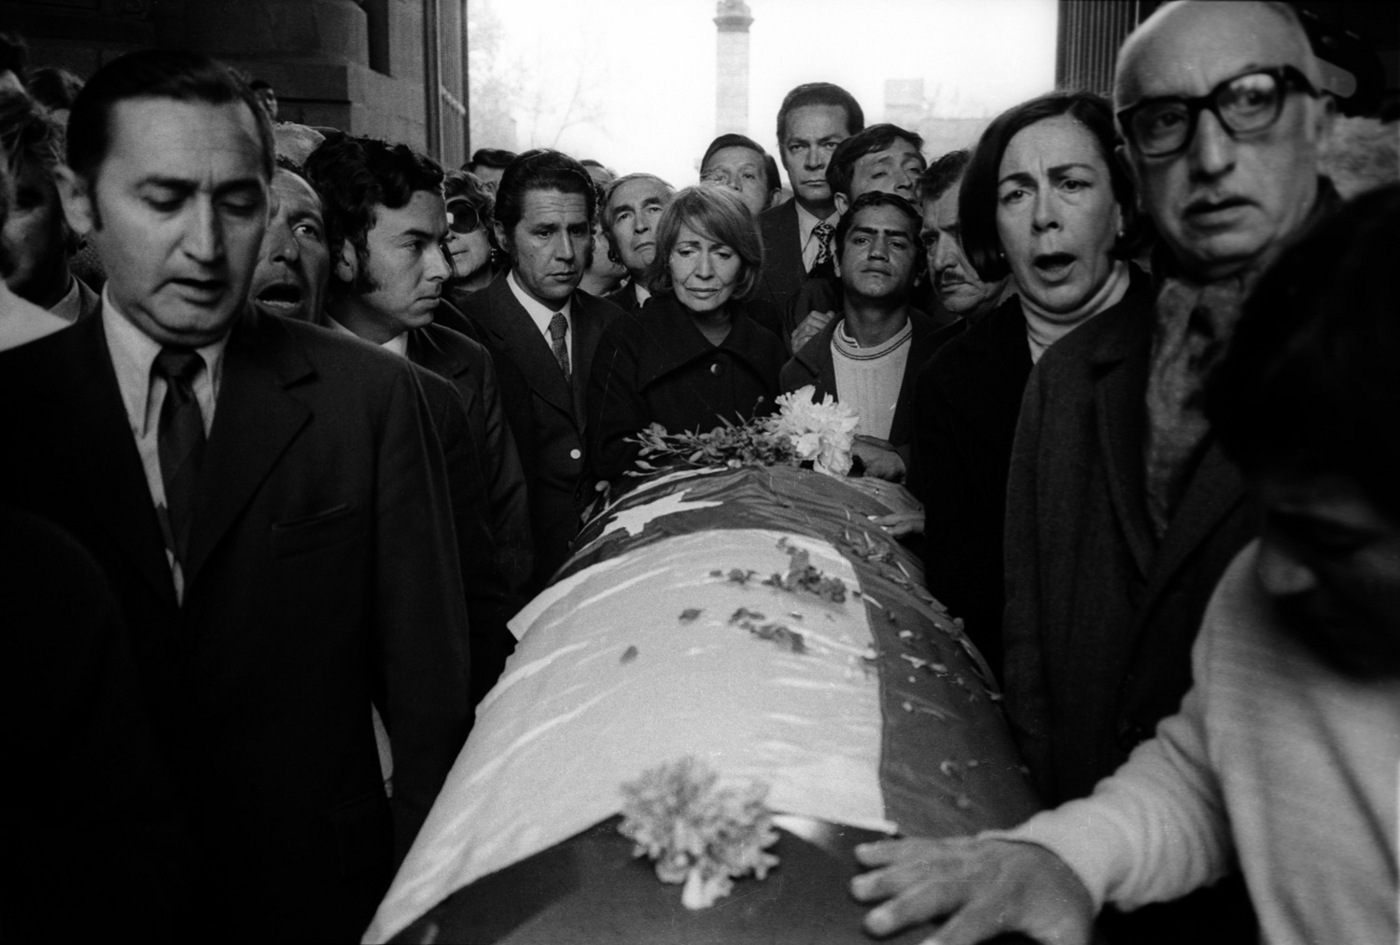 Mourners gather at the burial of Pablo Neruda : Chile: 40 Years After the Coup d'Etat : David Burnett | Photographer